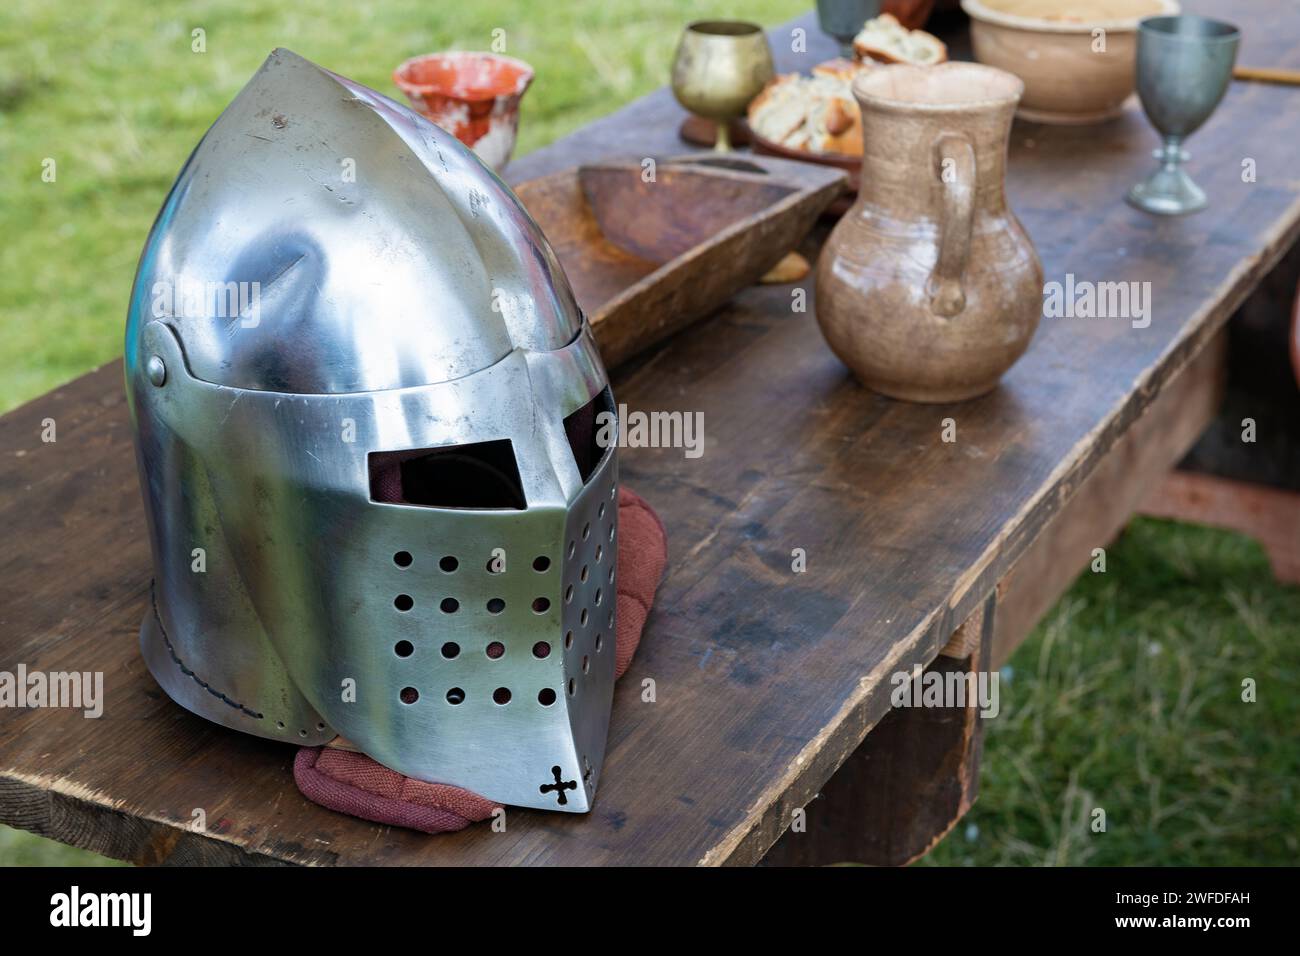 Medieval knight's helmet on the edge of a wooden table Stock Photo